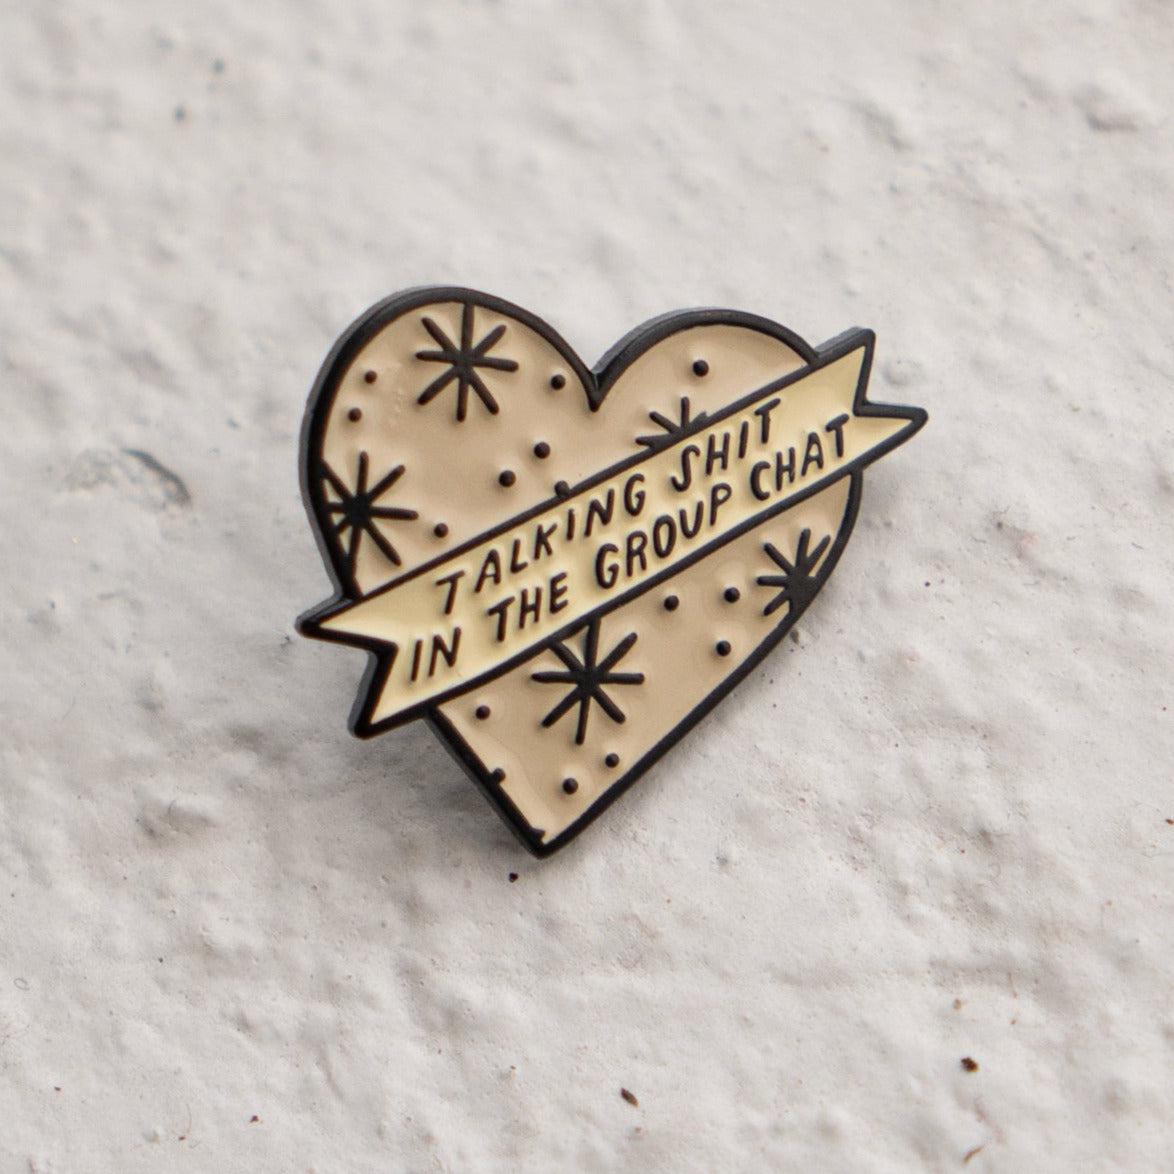 Stay Home Club-Group Chat Enamel Pin-accessory-gather here online